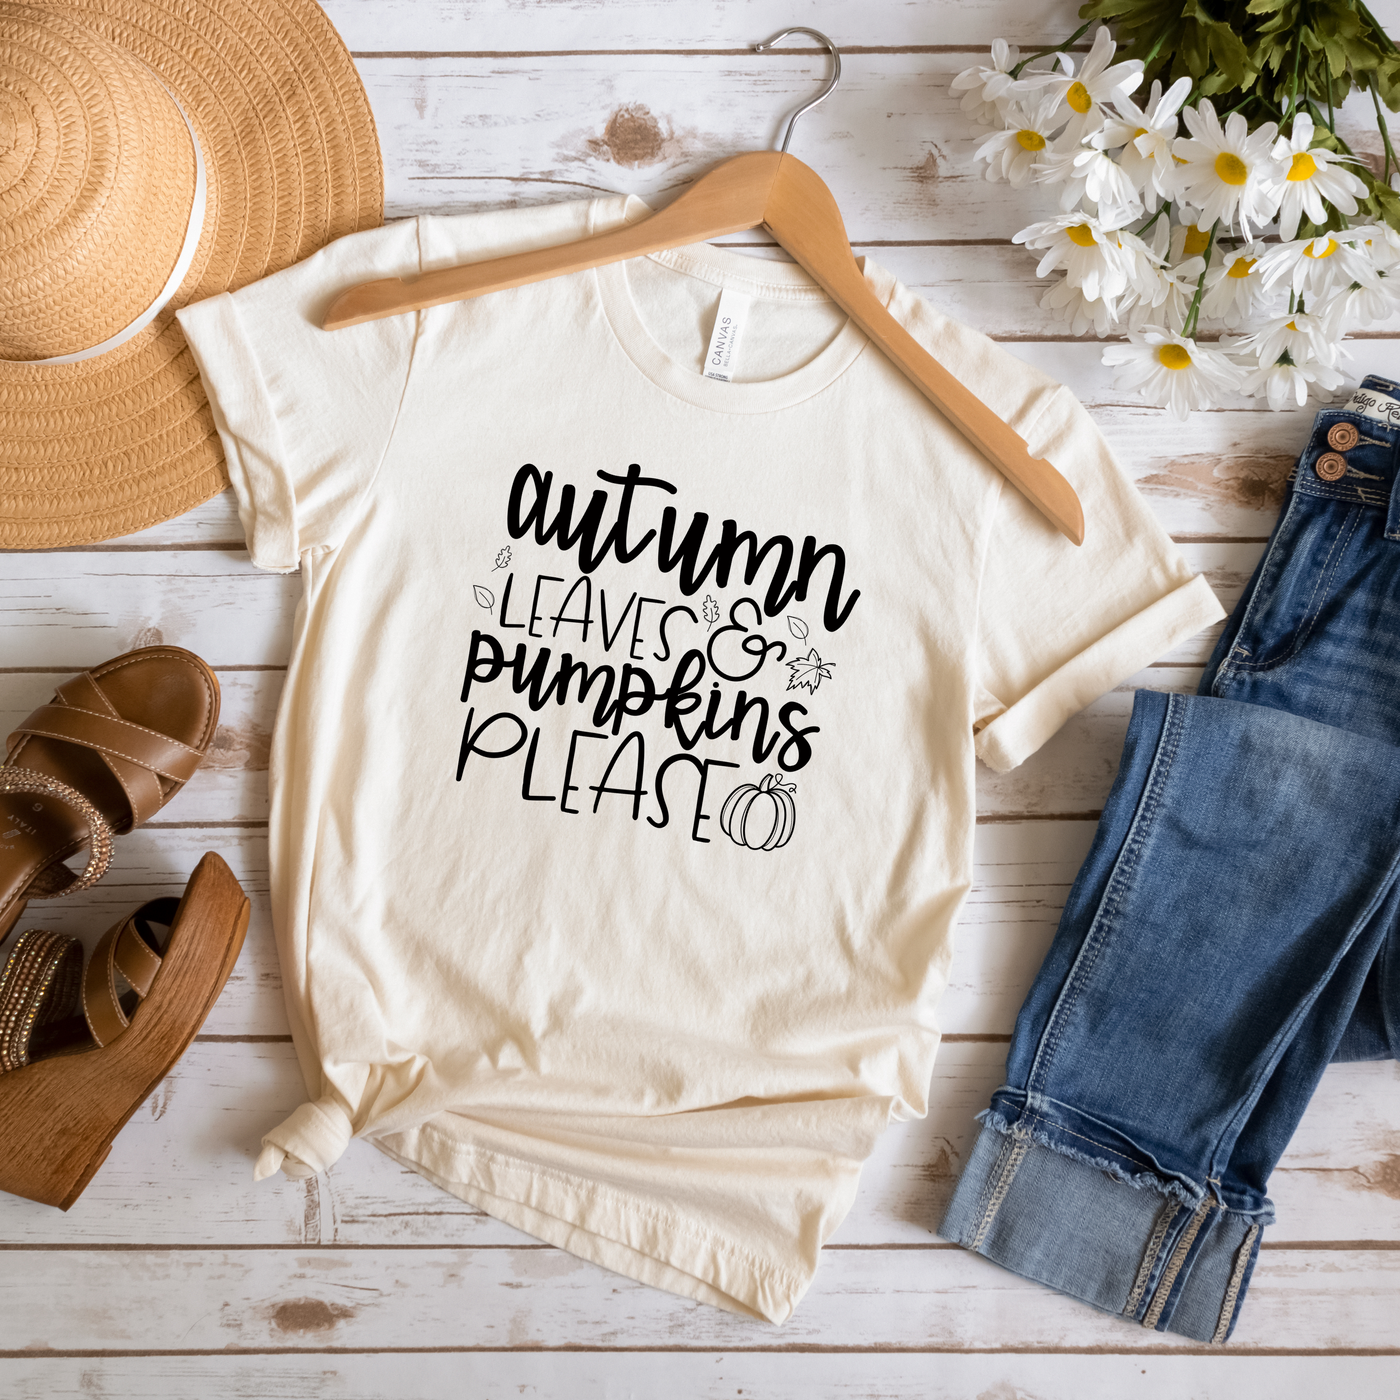 Autumn Leaves and Pumpkins Please Graphic Tee